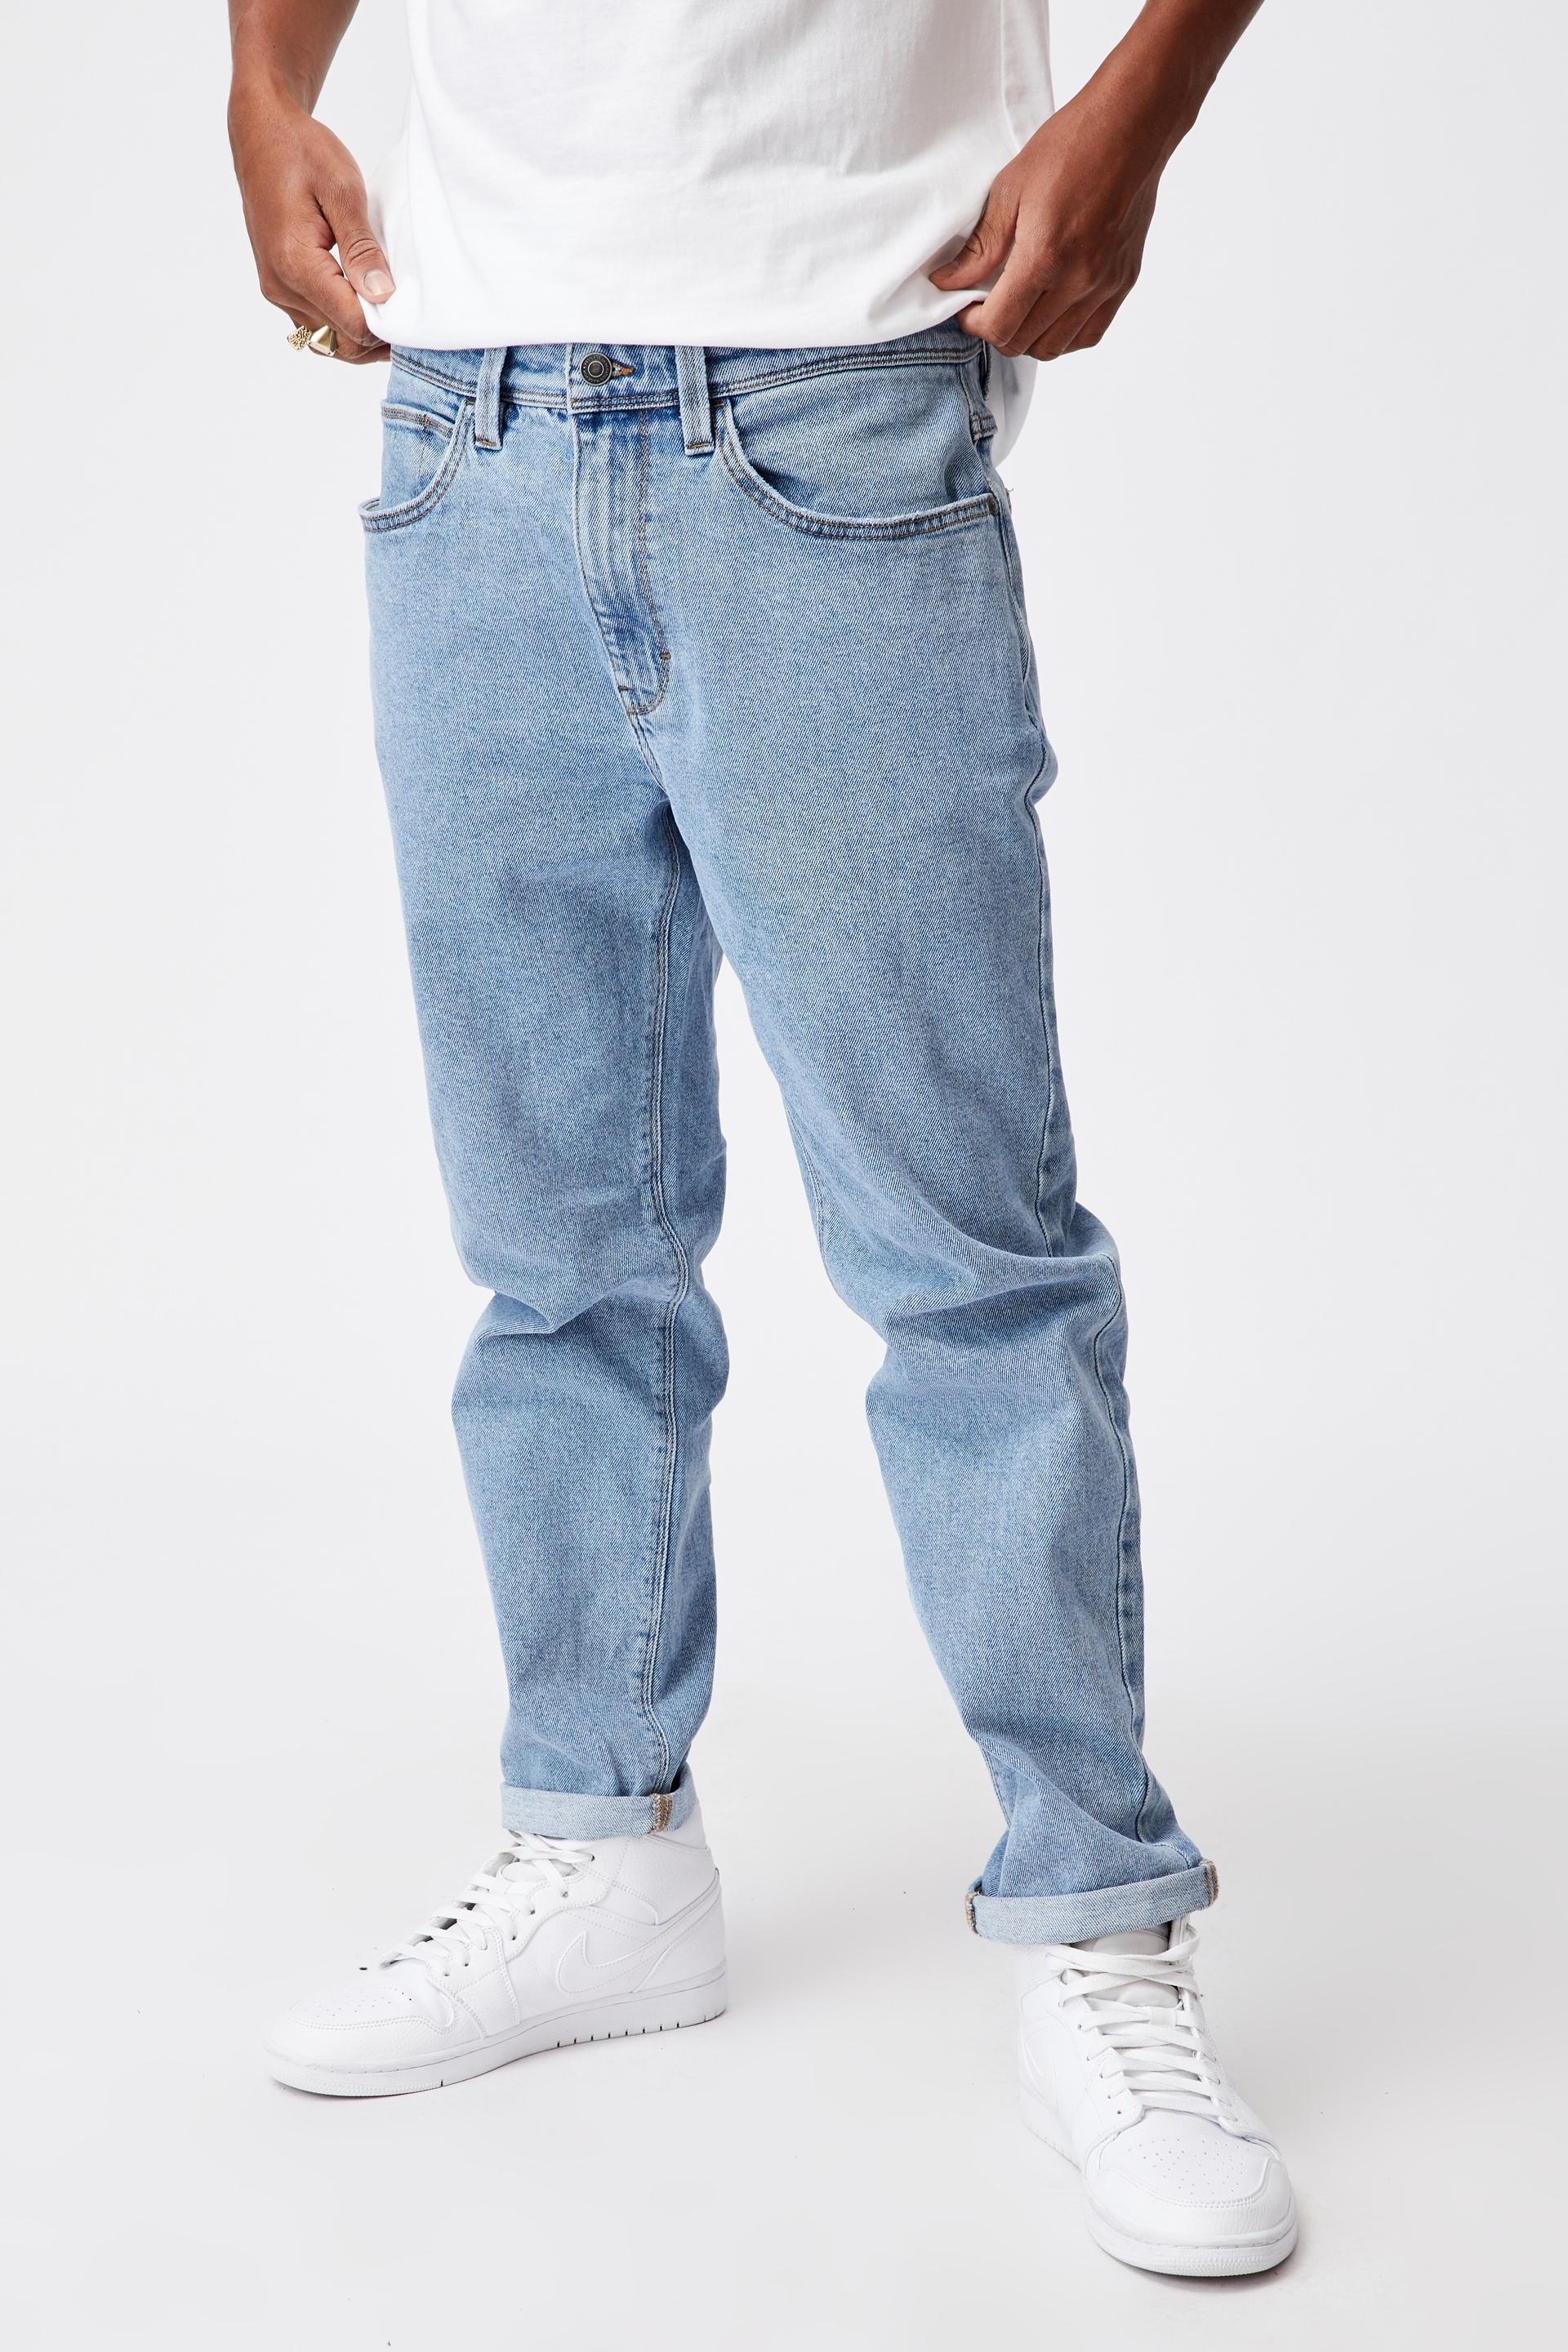 Relaxed fit jean - 90s blue Factorie Jeans | Superbalist.com